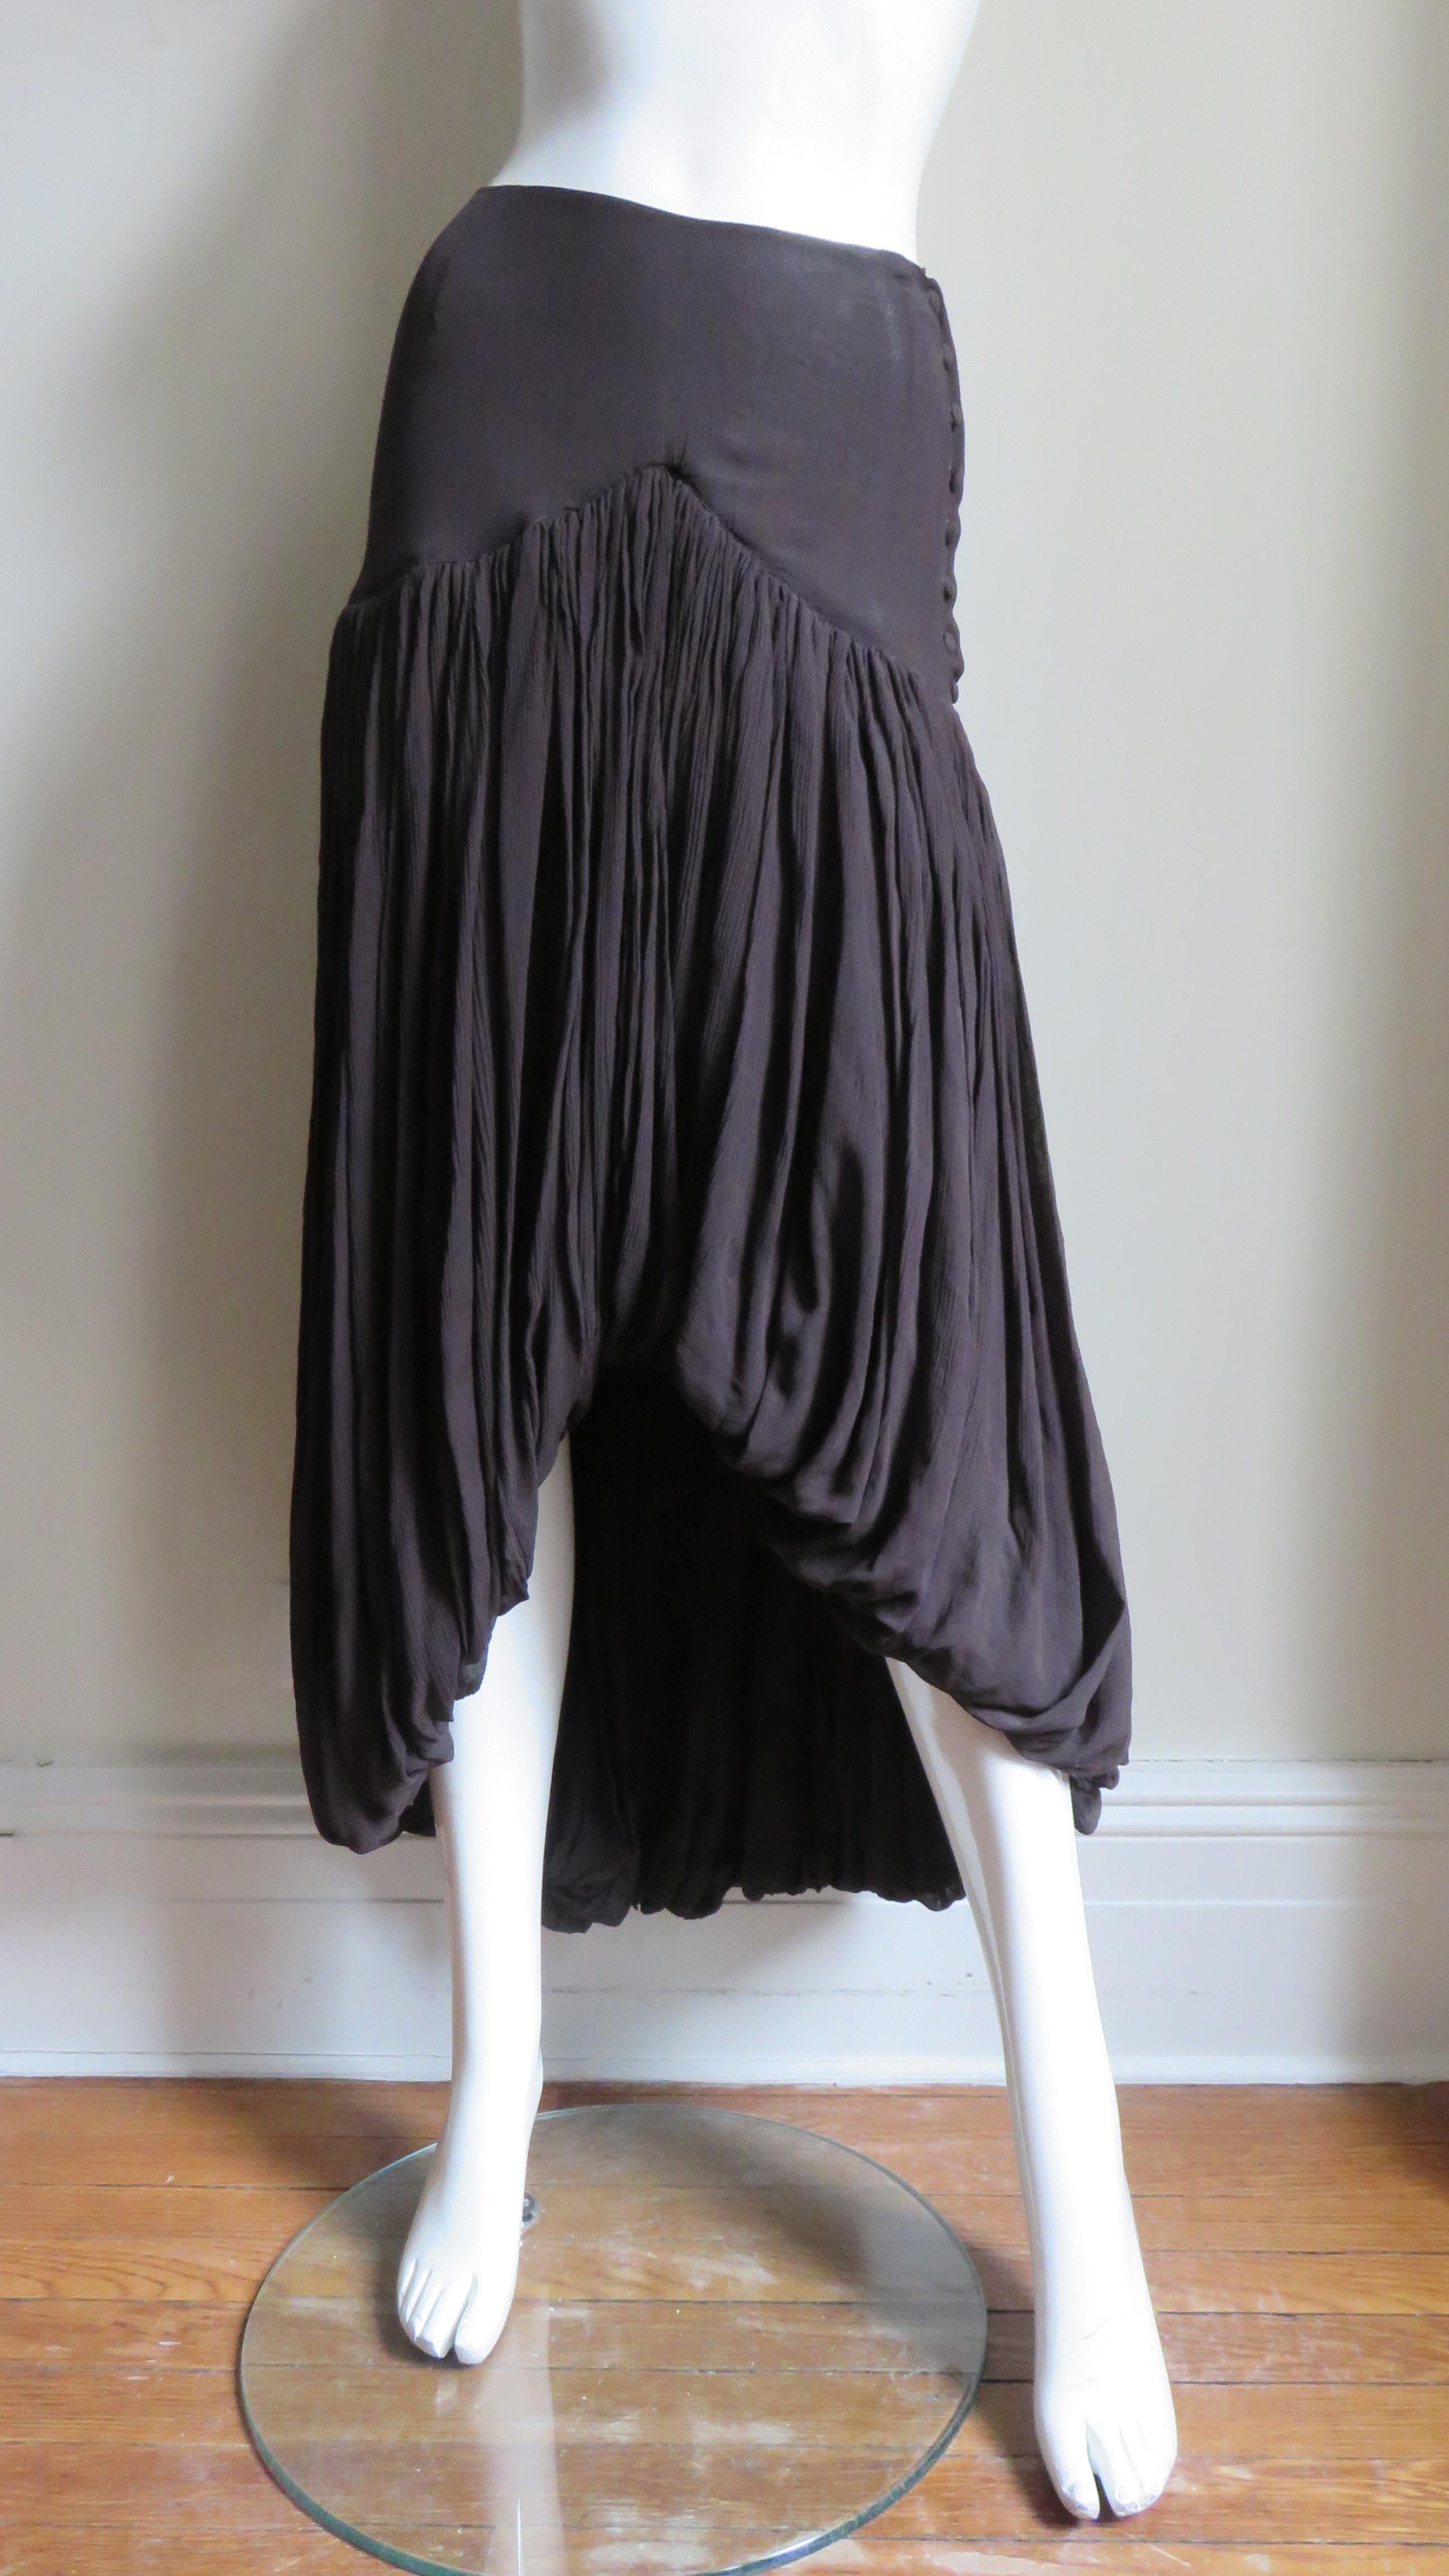 A fabulous rich brown silk skirt from Romeo Gigli.  It has an inverted V yoke in the front and a straight yoke in the back.  The skirt is gathered on to the yokes draping to the hem. The skirt is shorter in the front forming a rounded inverted V